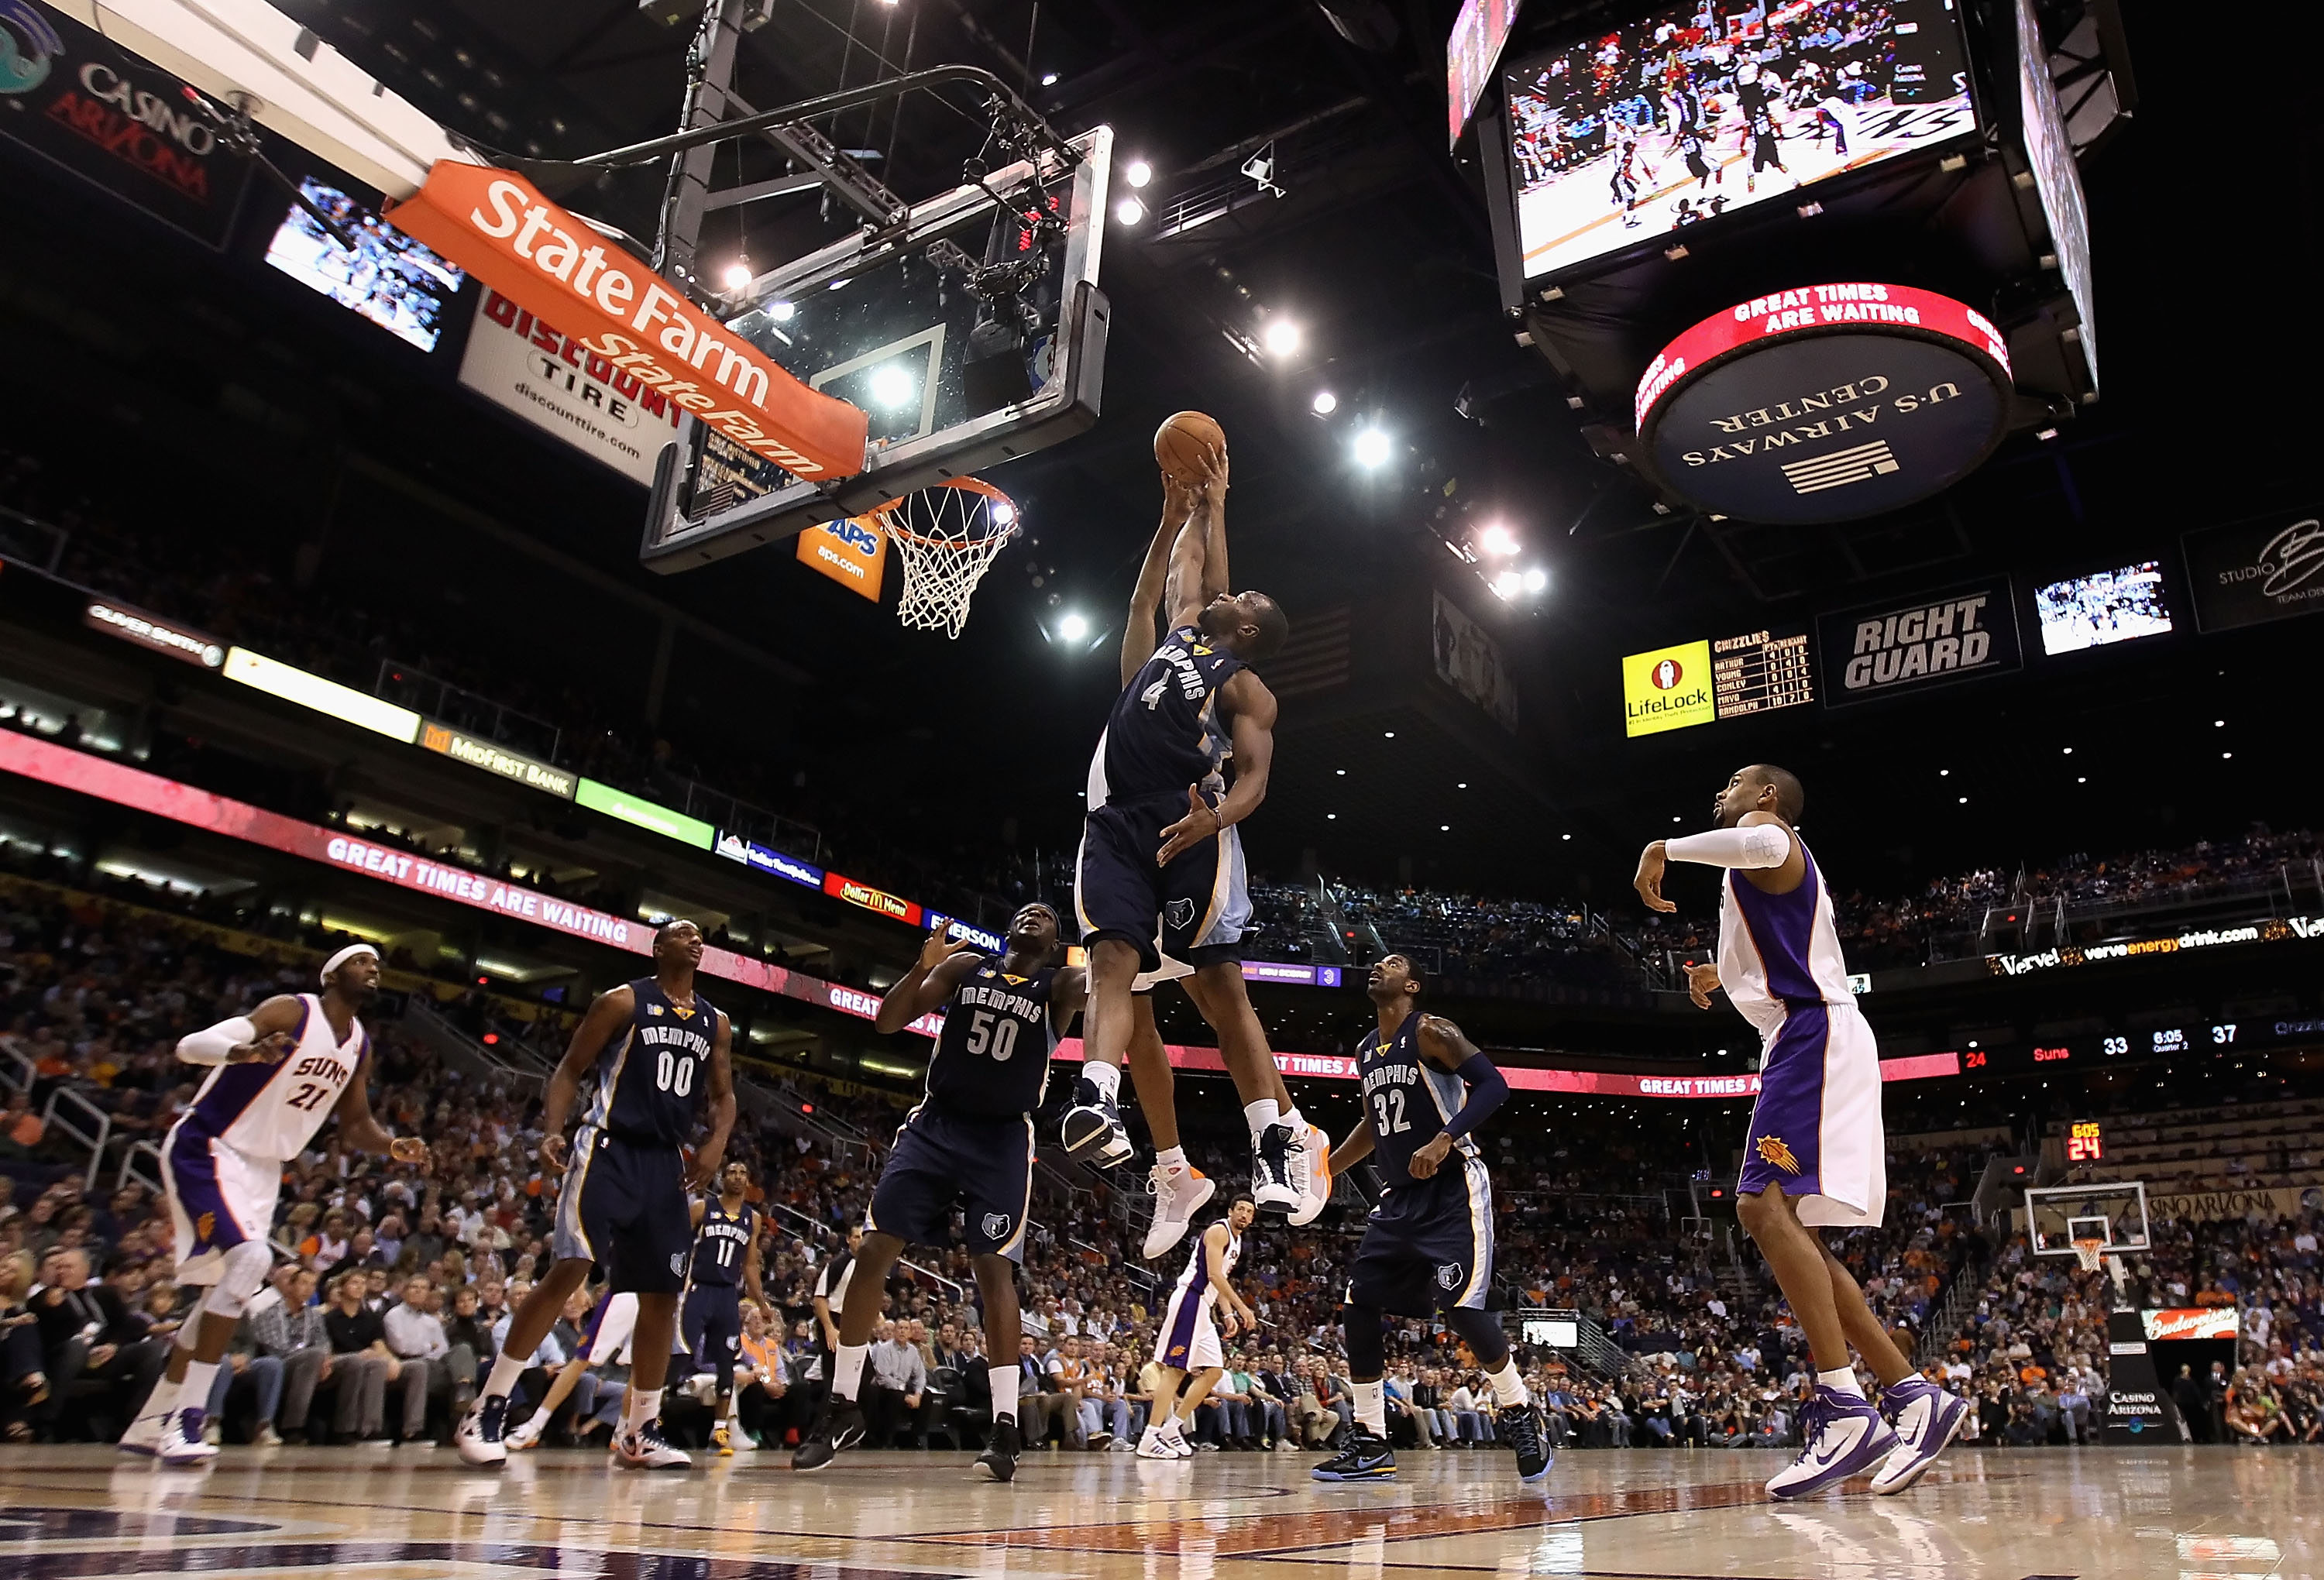 PHOENIX - DECEMBER 08:  Sam Young #4 of the Memphis Grizzlies jumps for a rebound against the Phoenix Suns during the NBA game at US Airways Center on December 8, 2010 in Phoenix, Arizona. NOTE TO USER: User expressly acknowledges and agrees that, by down